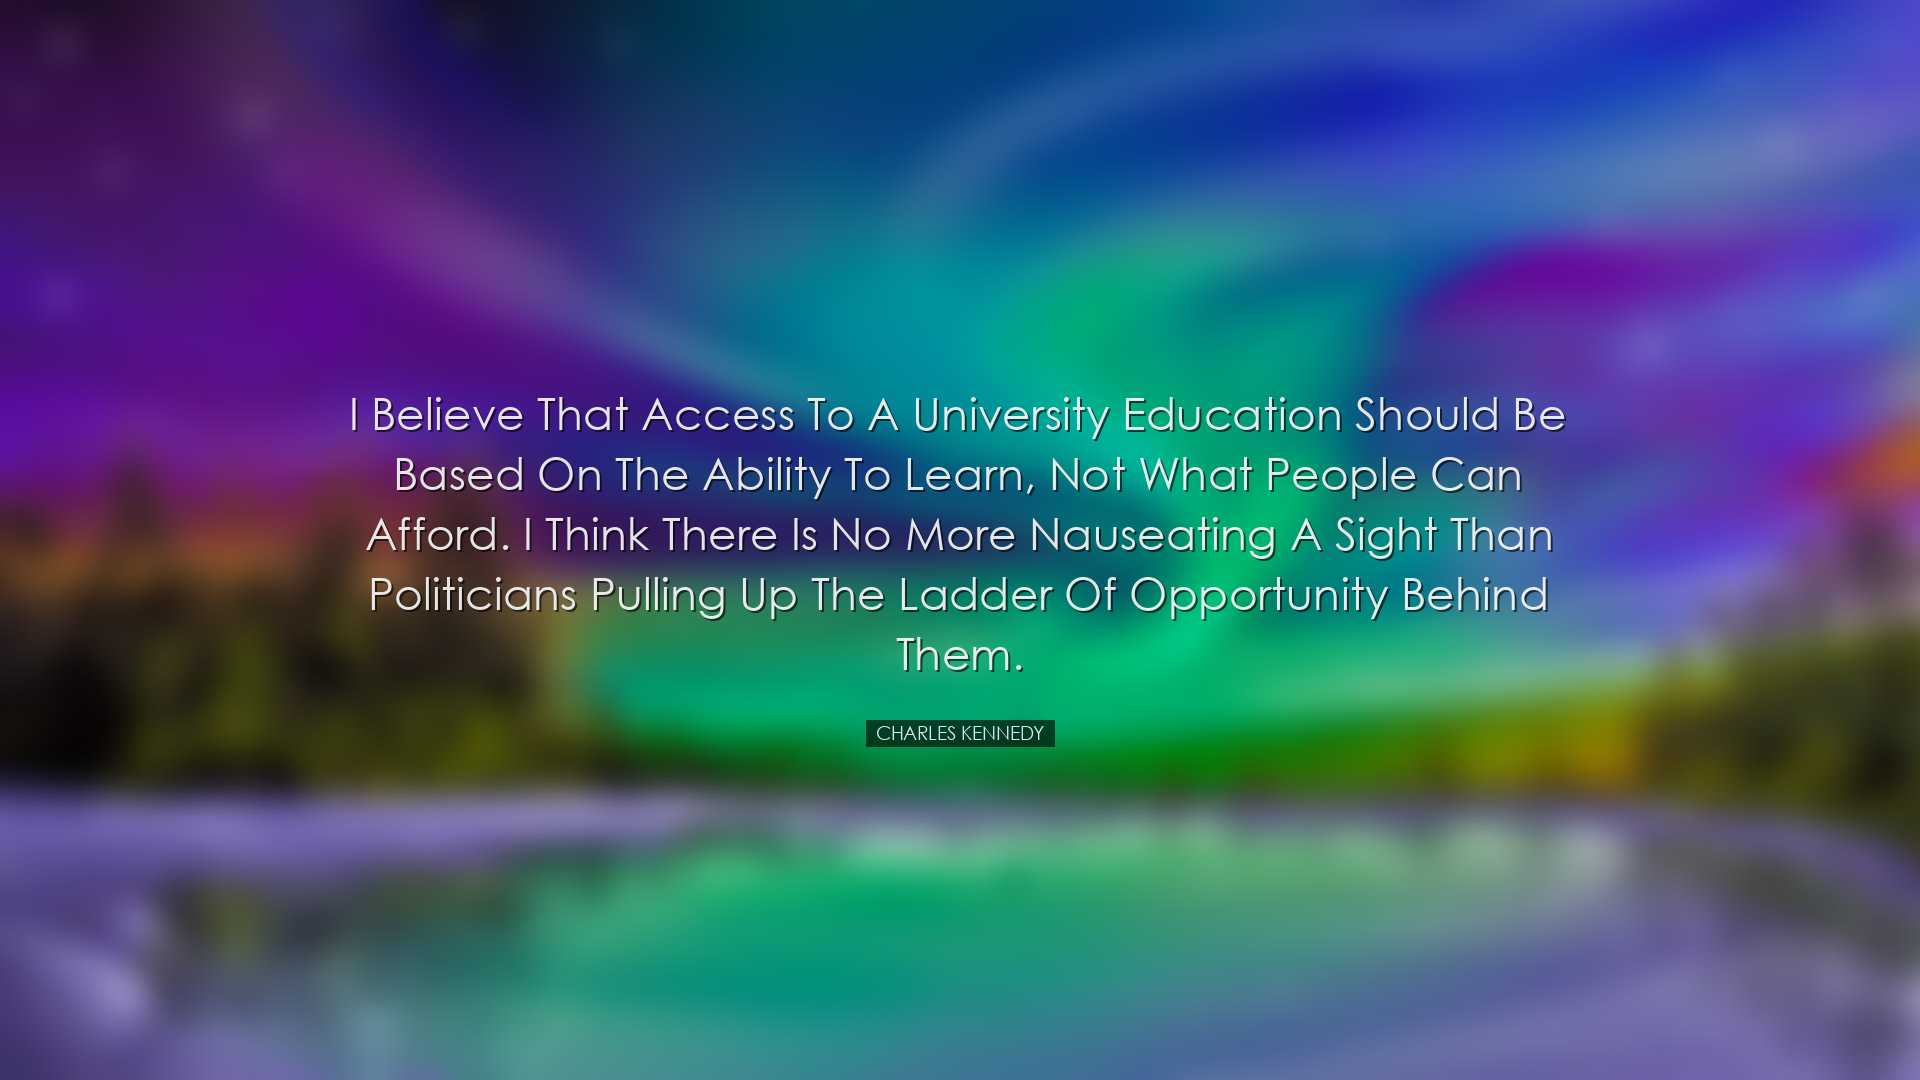 I believe that access to a university education should be based on